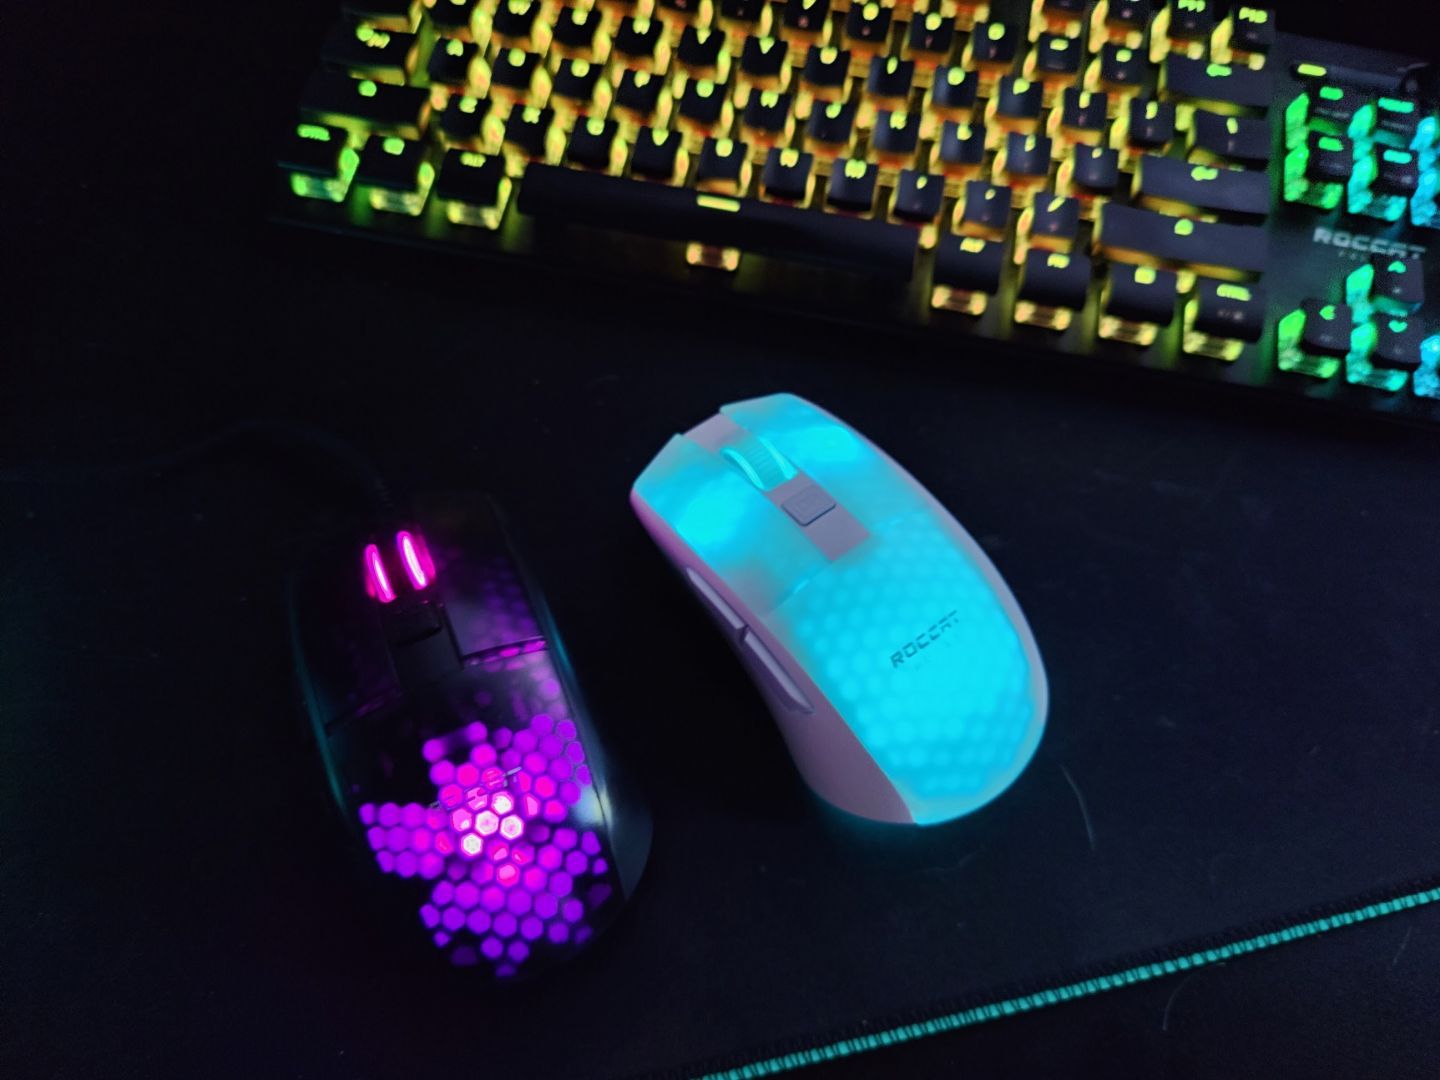 As GOOD as it gets! Roccat Burst Pro Air Gaming Mouse Review 